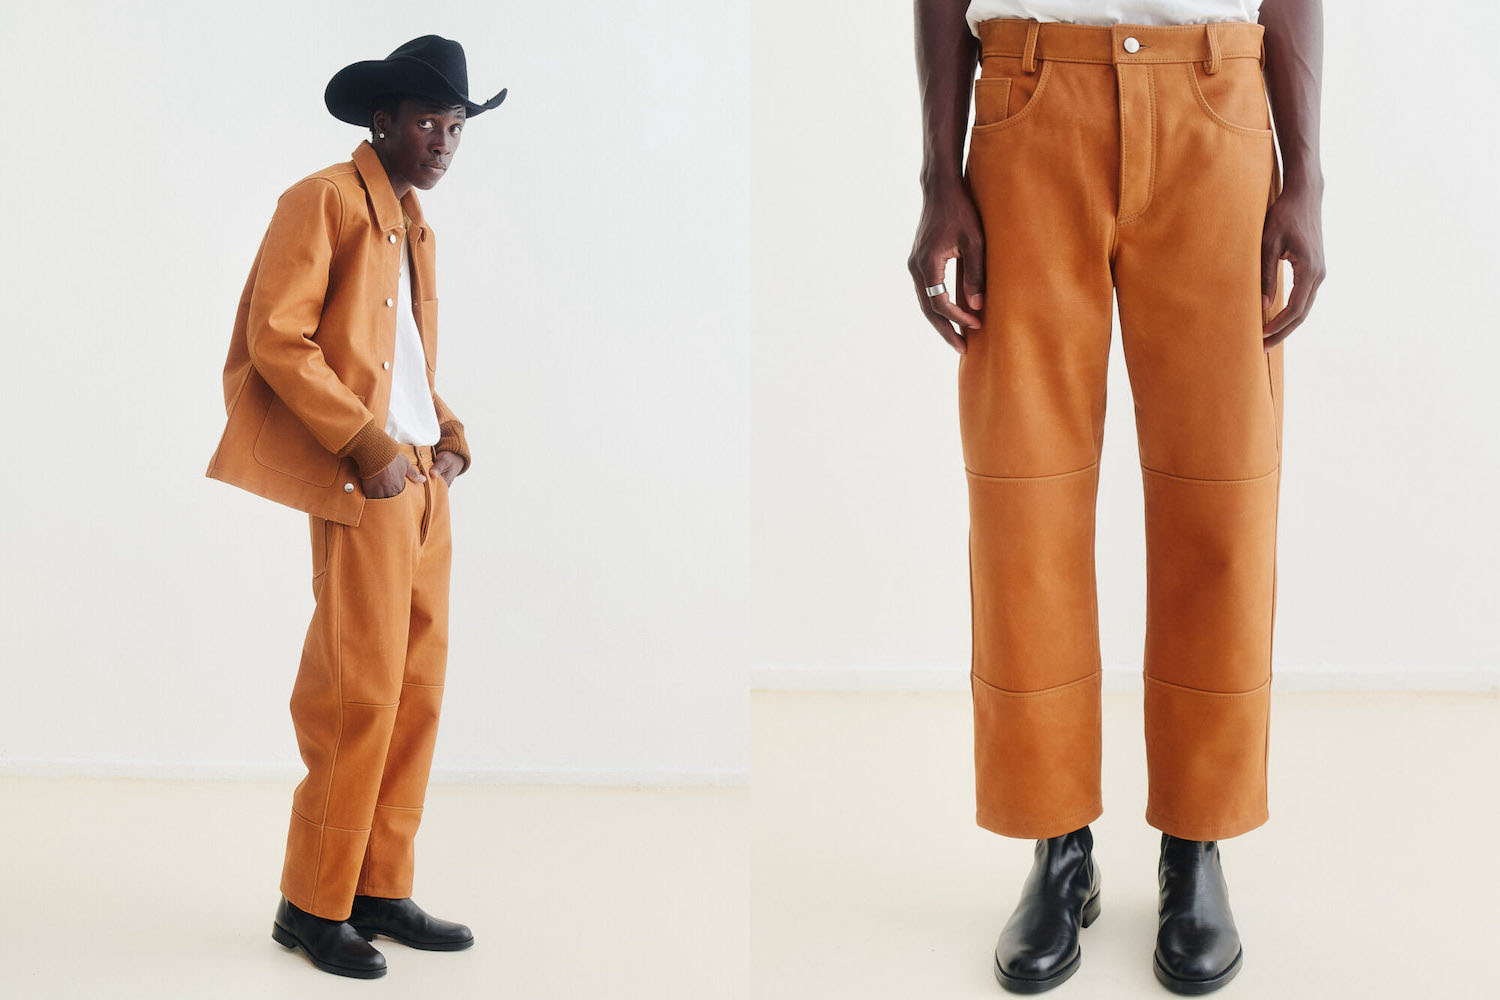 two model photos of caramel-colored leather pants